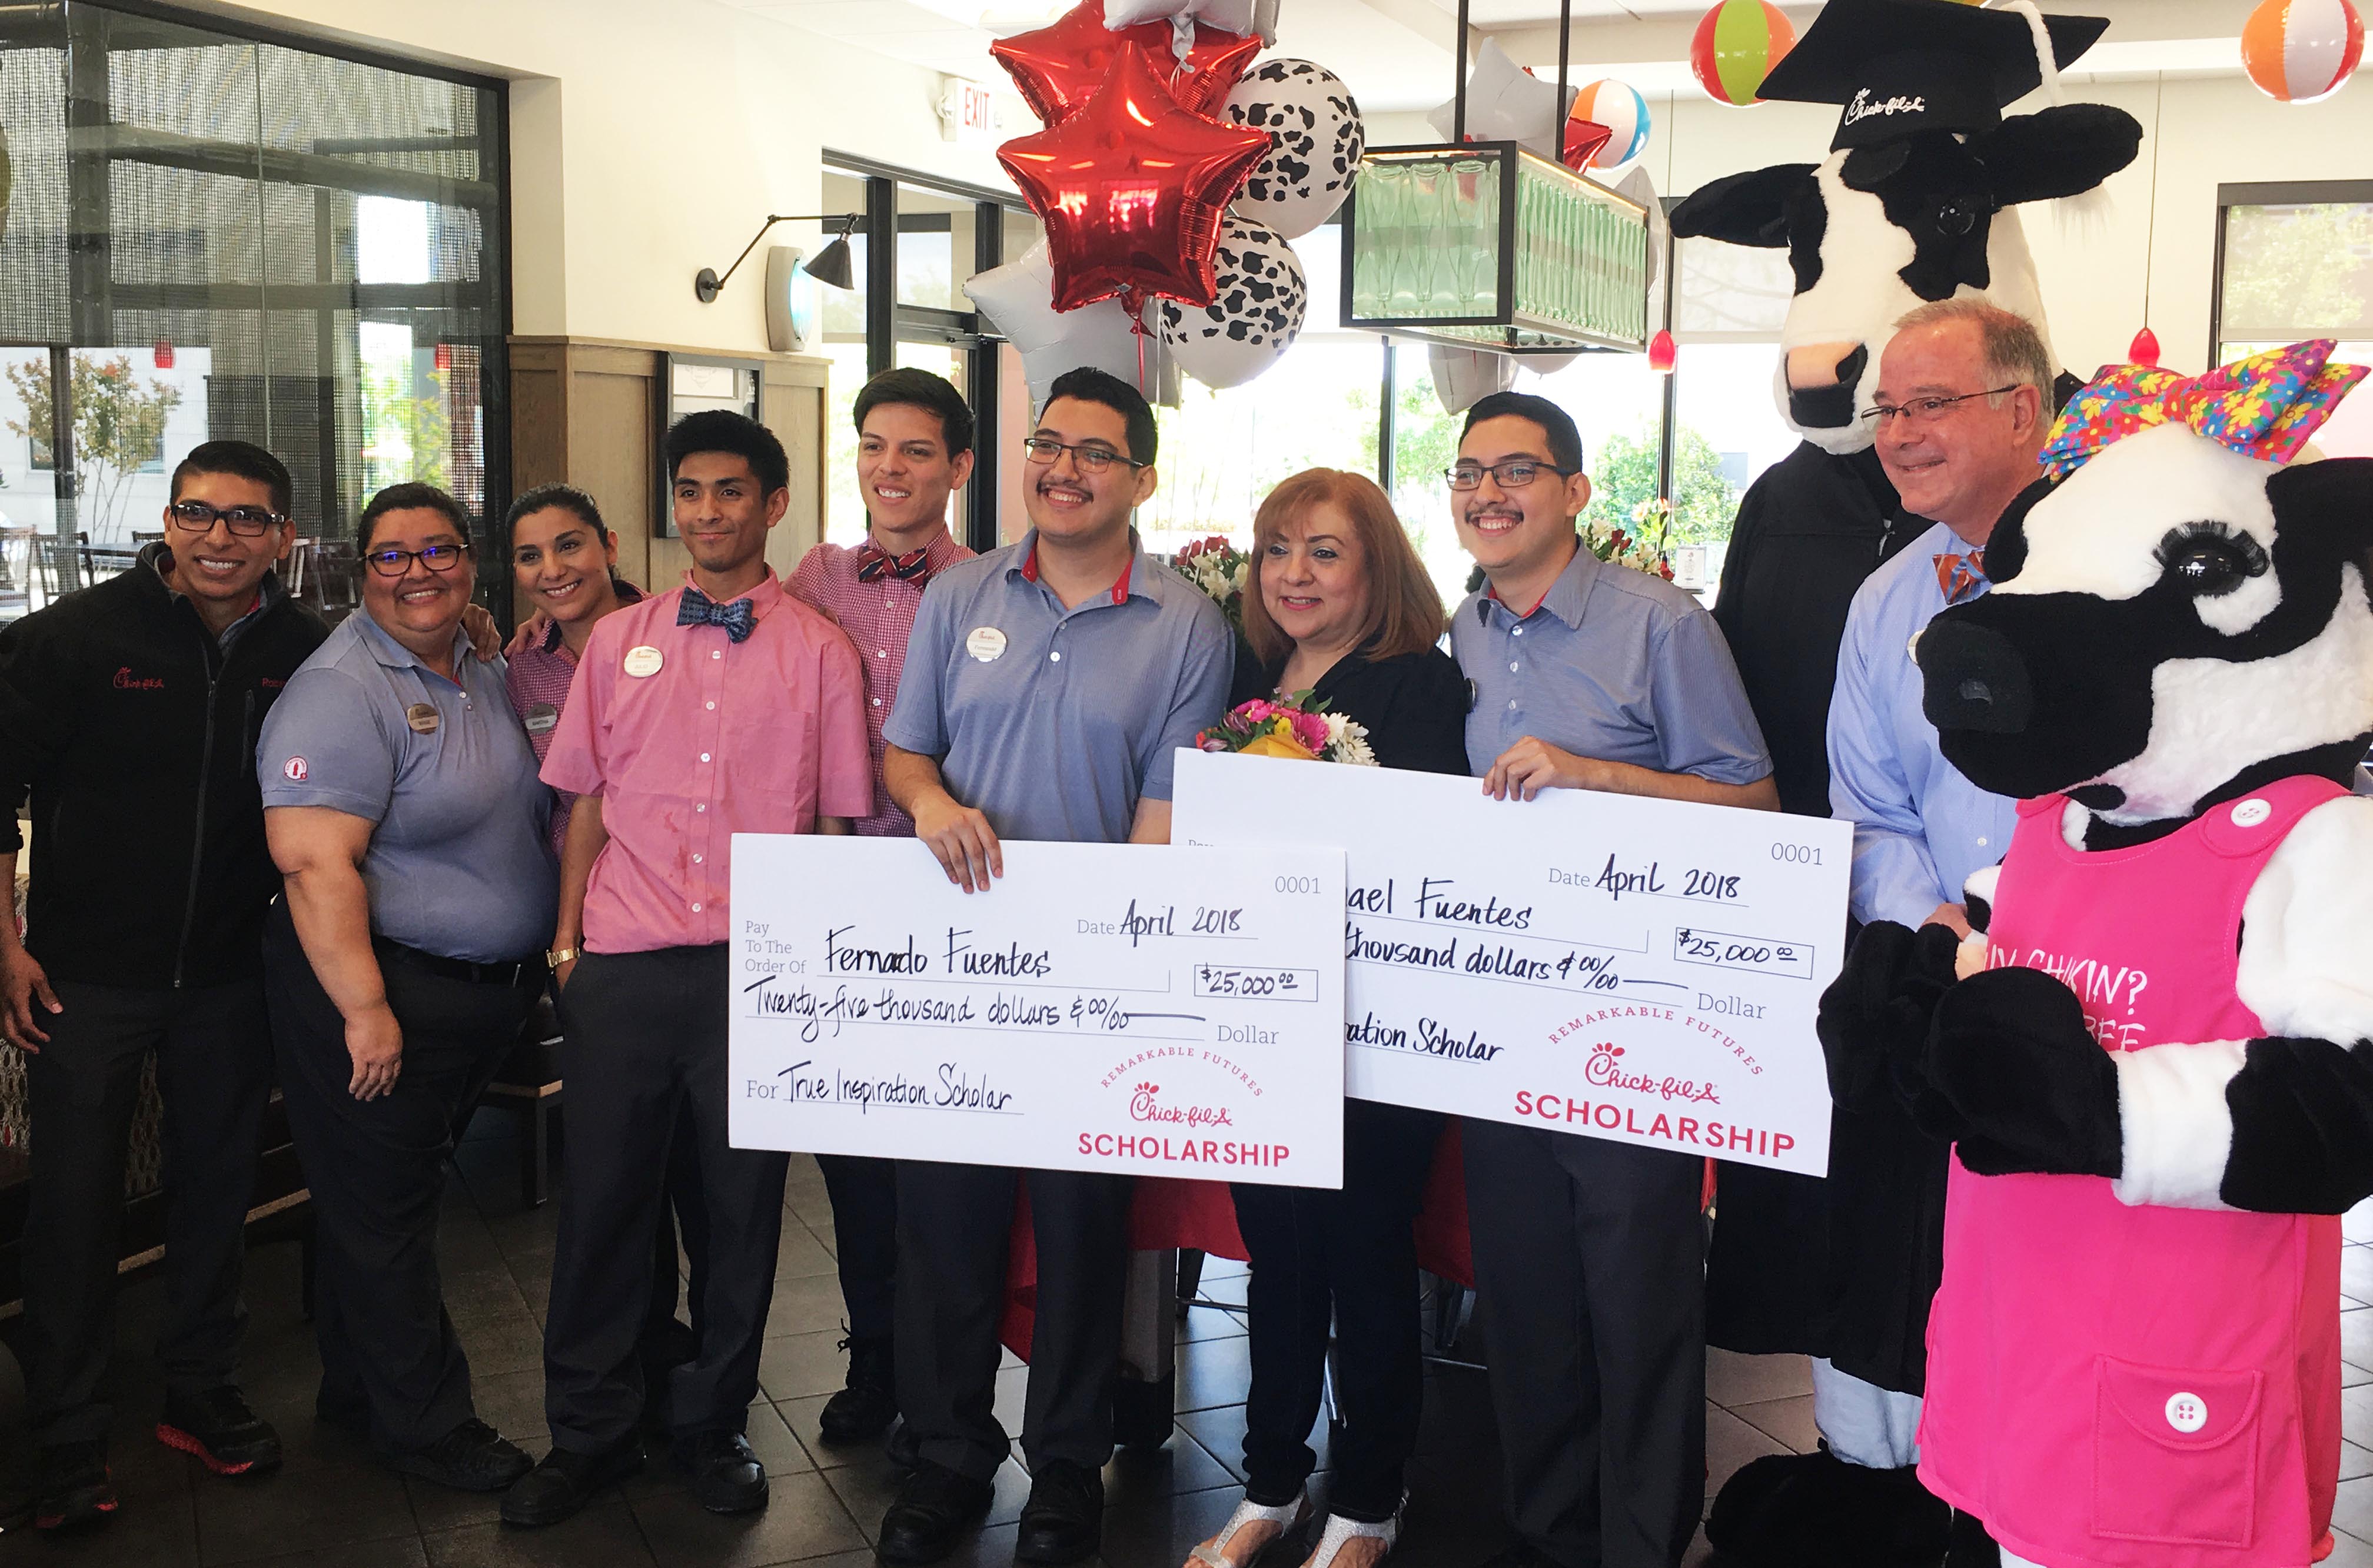 Premier High School Grads Awarded $50K in Scholarships from Chick-fil-A